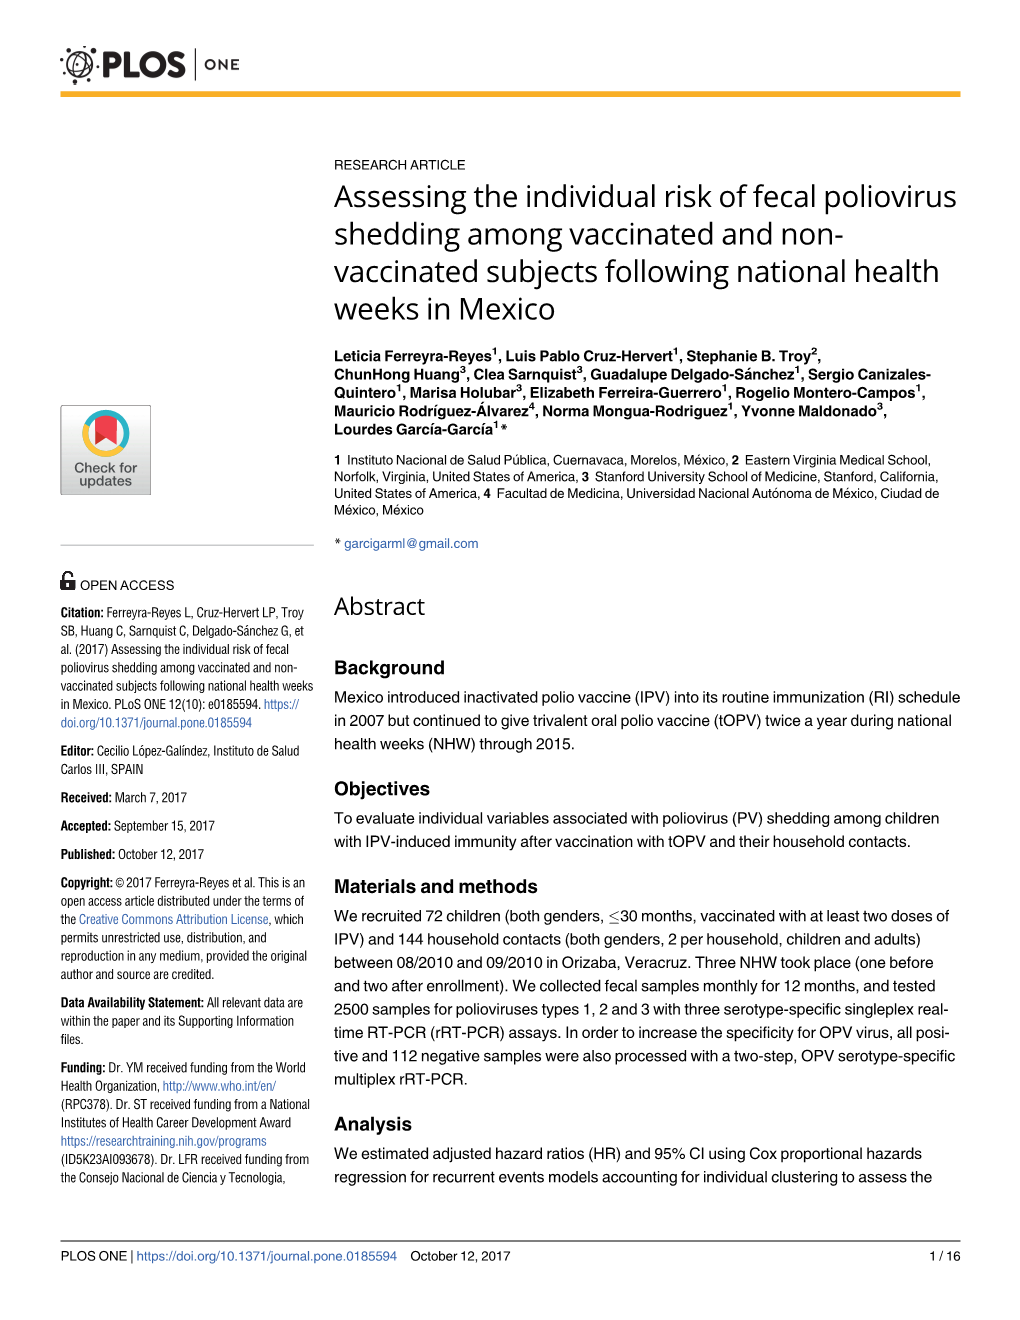 Assessing the Individual Risk of Fecal Poliovirus Shedding Among Vaccinated and Non- Vaccinated Subjects Following National Health Weeks in Mexico